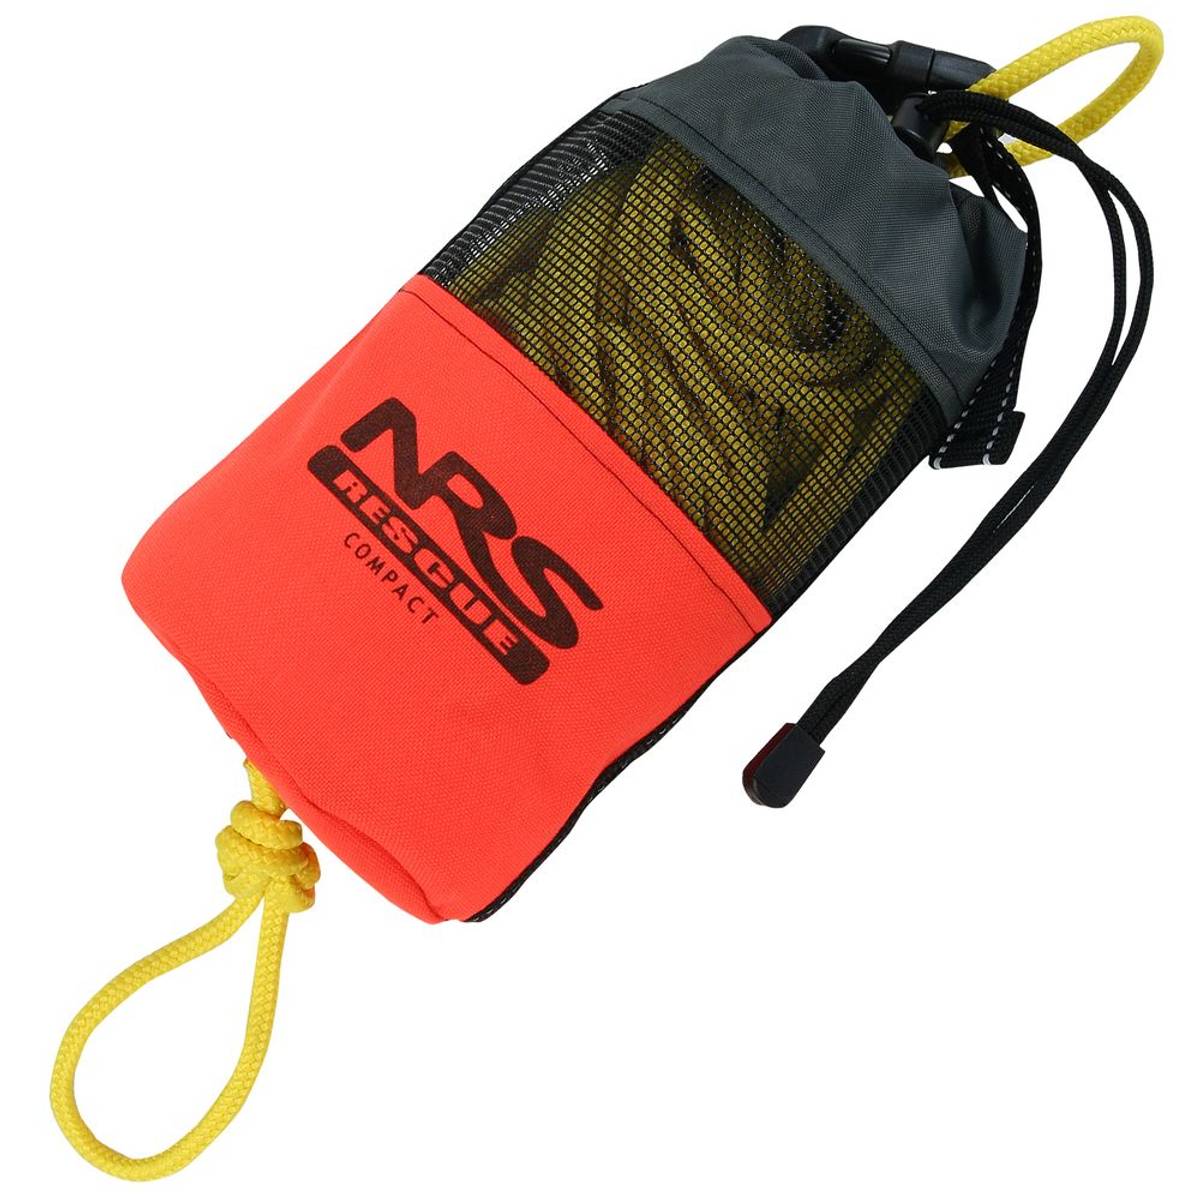 NRS Compact Rescue, throwing line